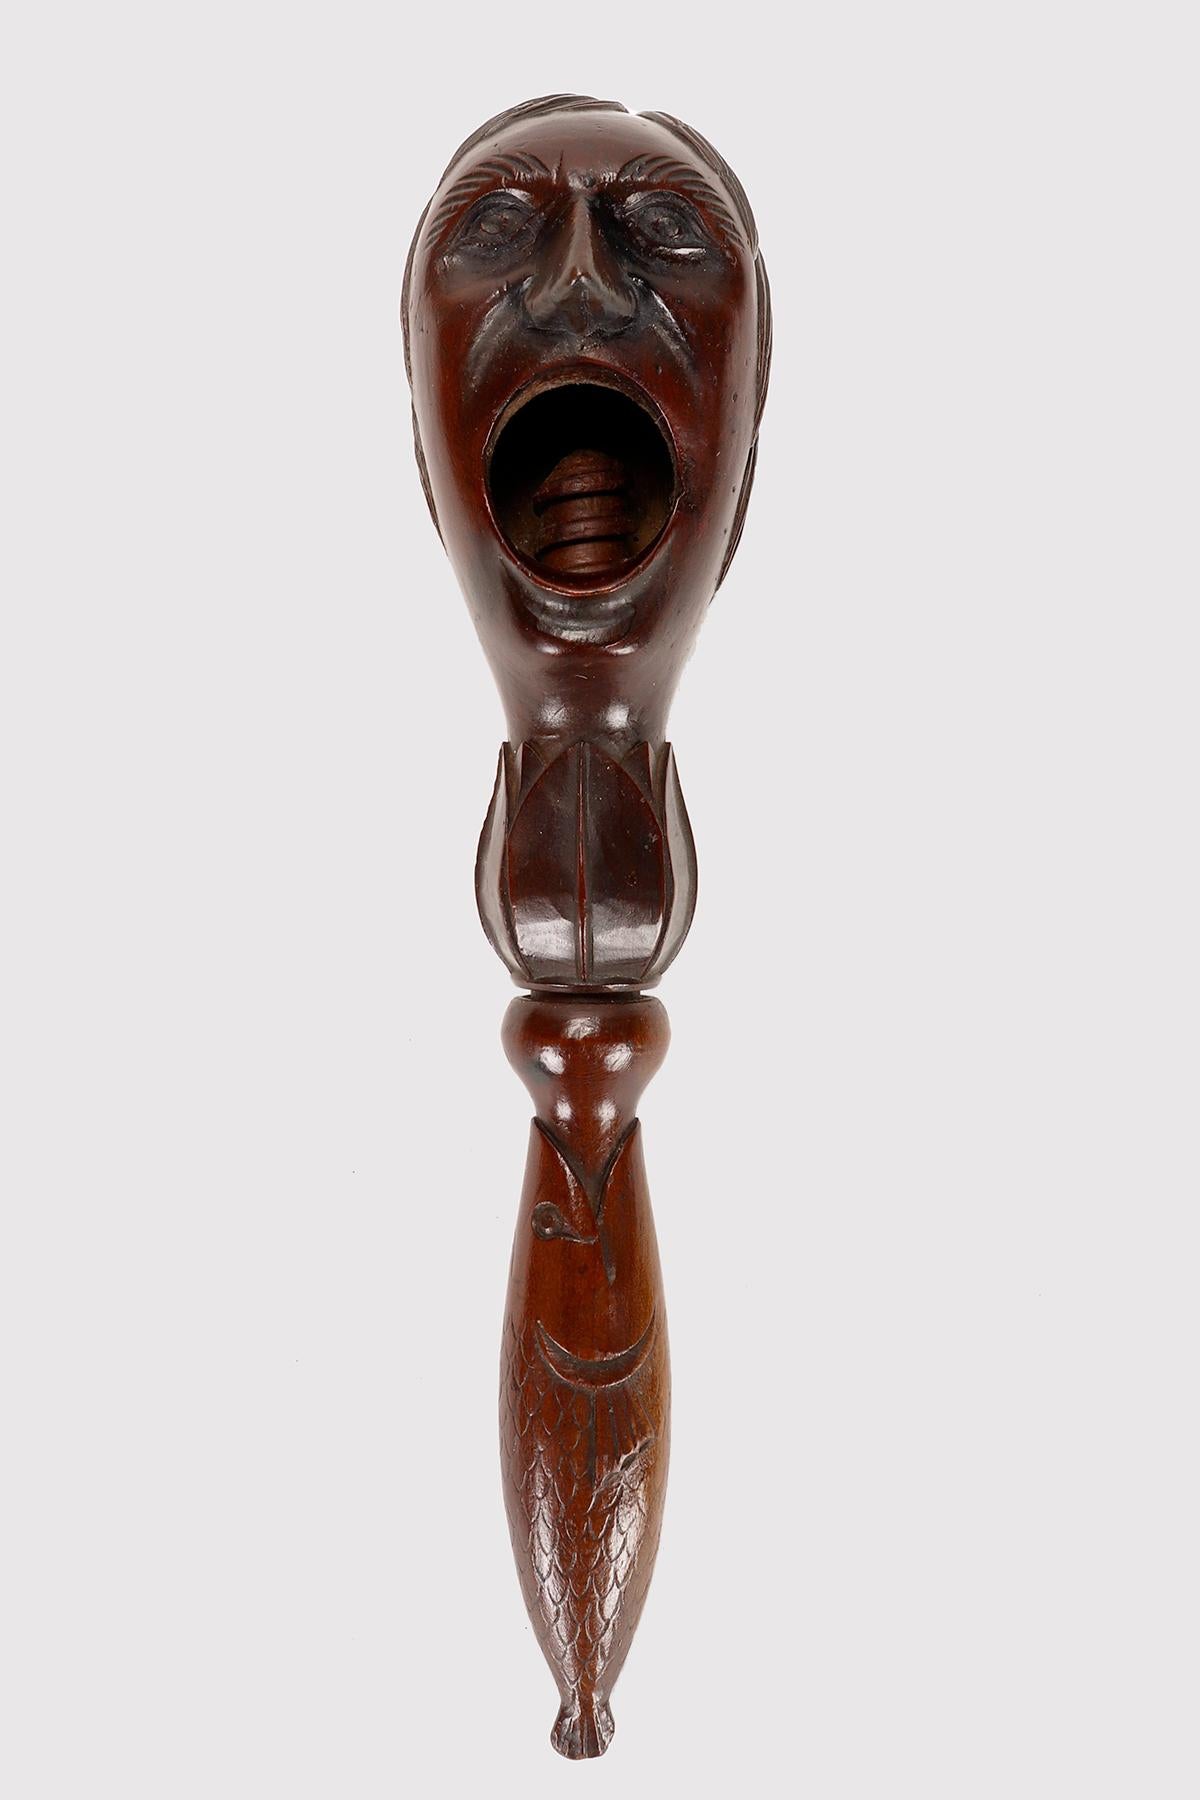 Made out of hazel wood, the nutcracker simply depicts a screaming man’s head. The handle depicts a fish. The subject is really unusual, the quality of sculpting, carving and cure of each detail, original patina. France circa 1880. 